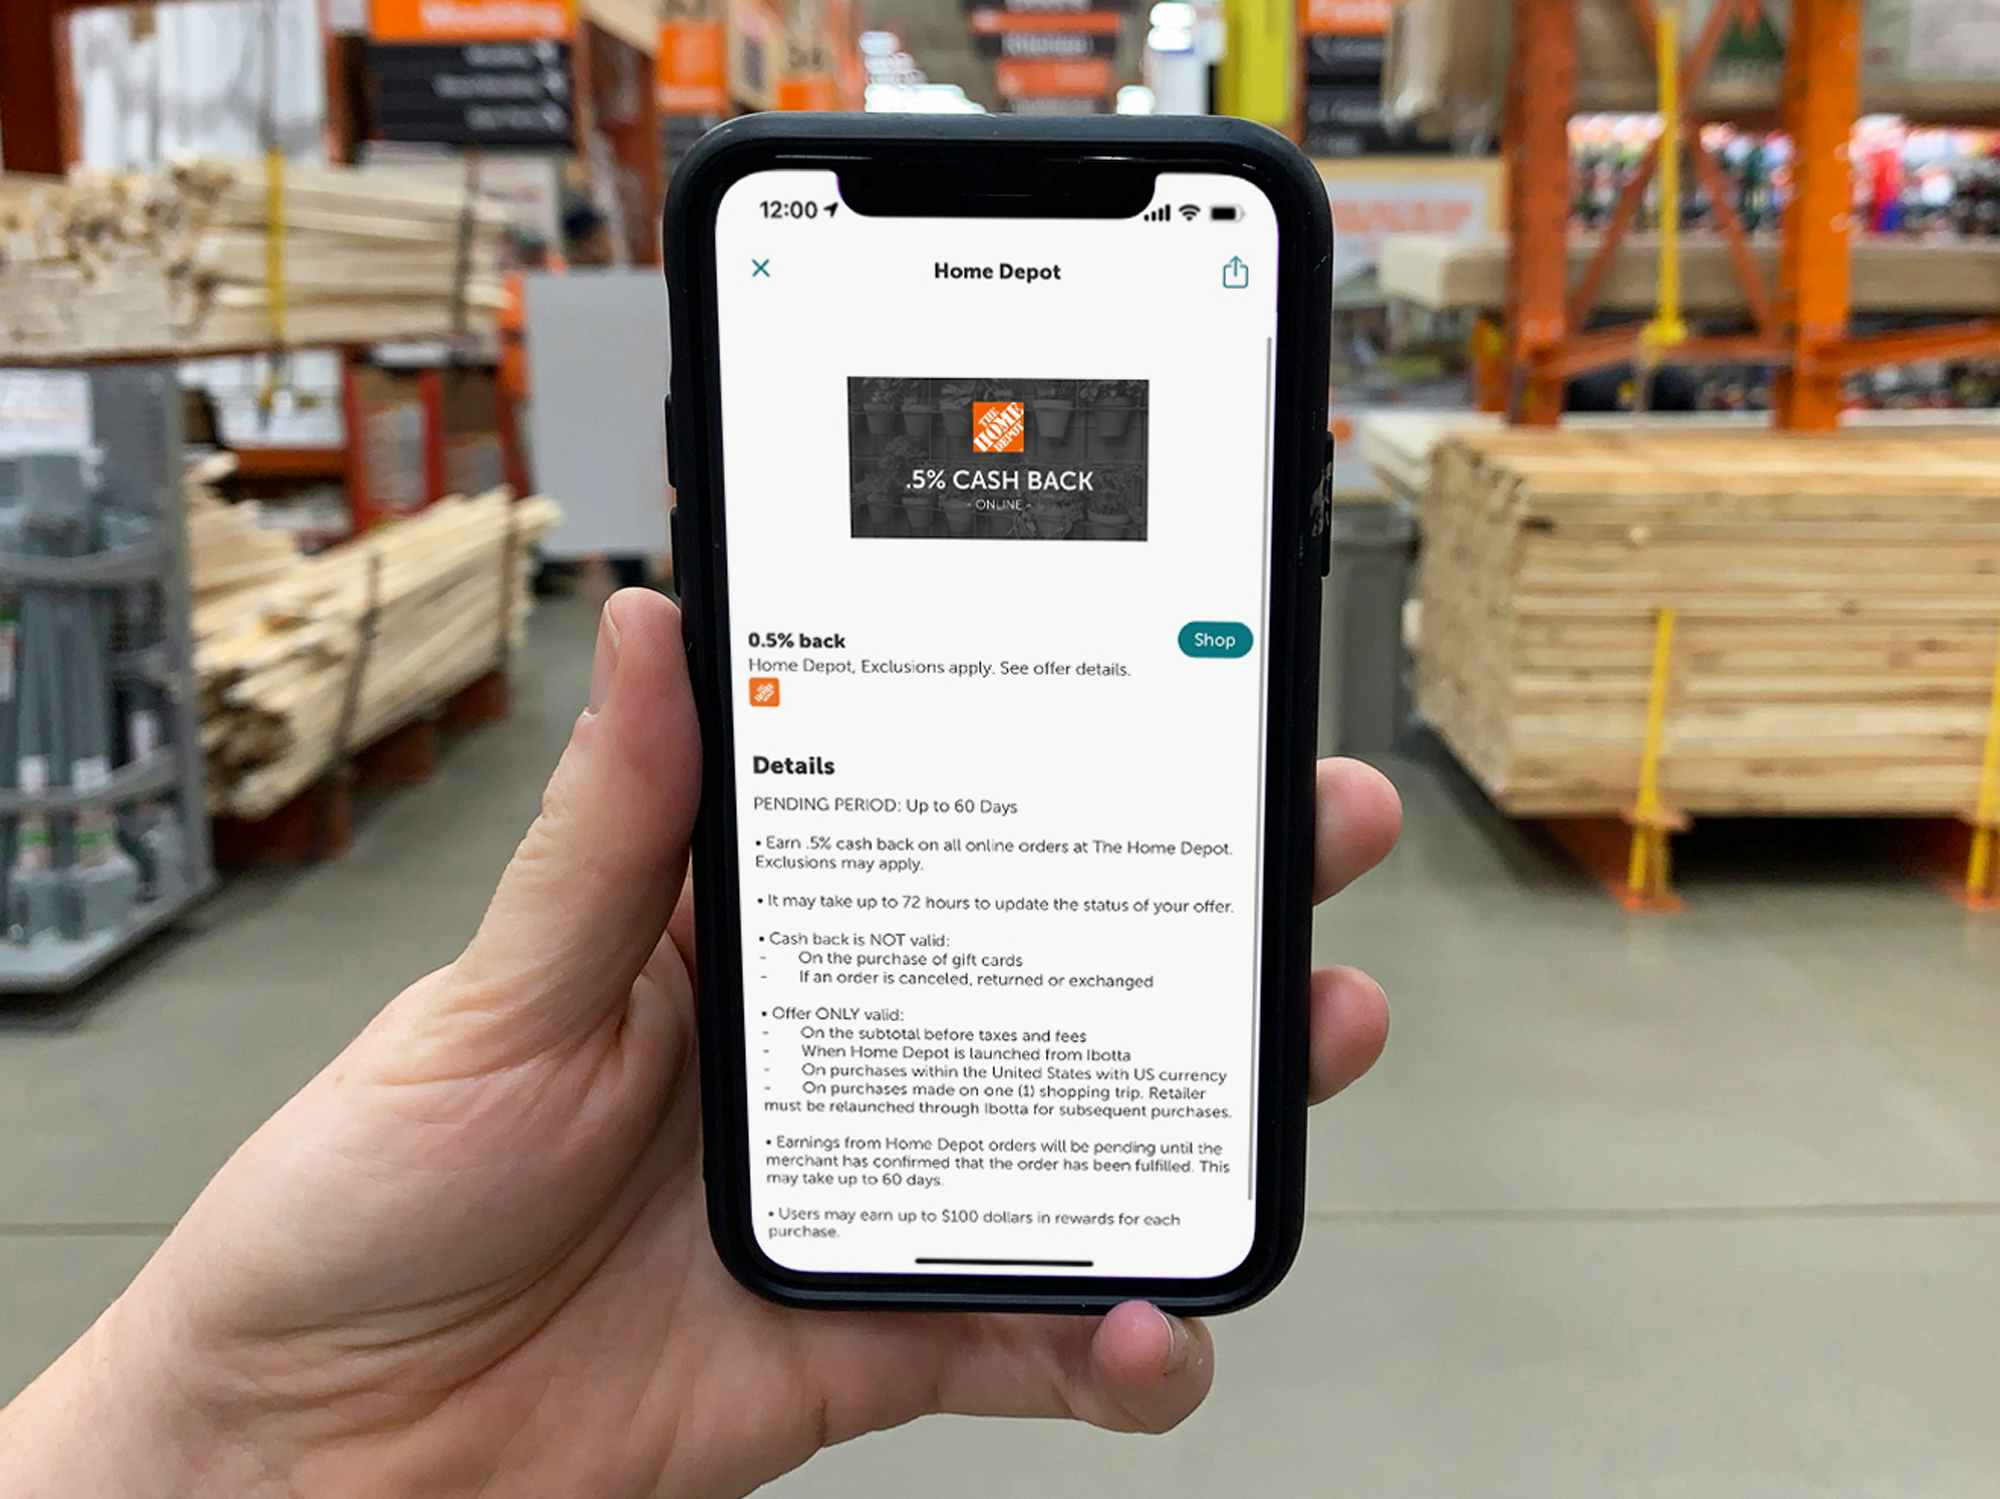 A person's hand holding up a phone displaying the Home Depot offer page on the Ibotta app inside Home Depot.